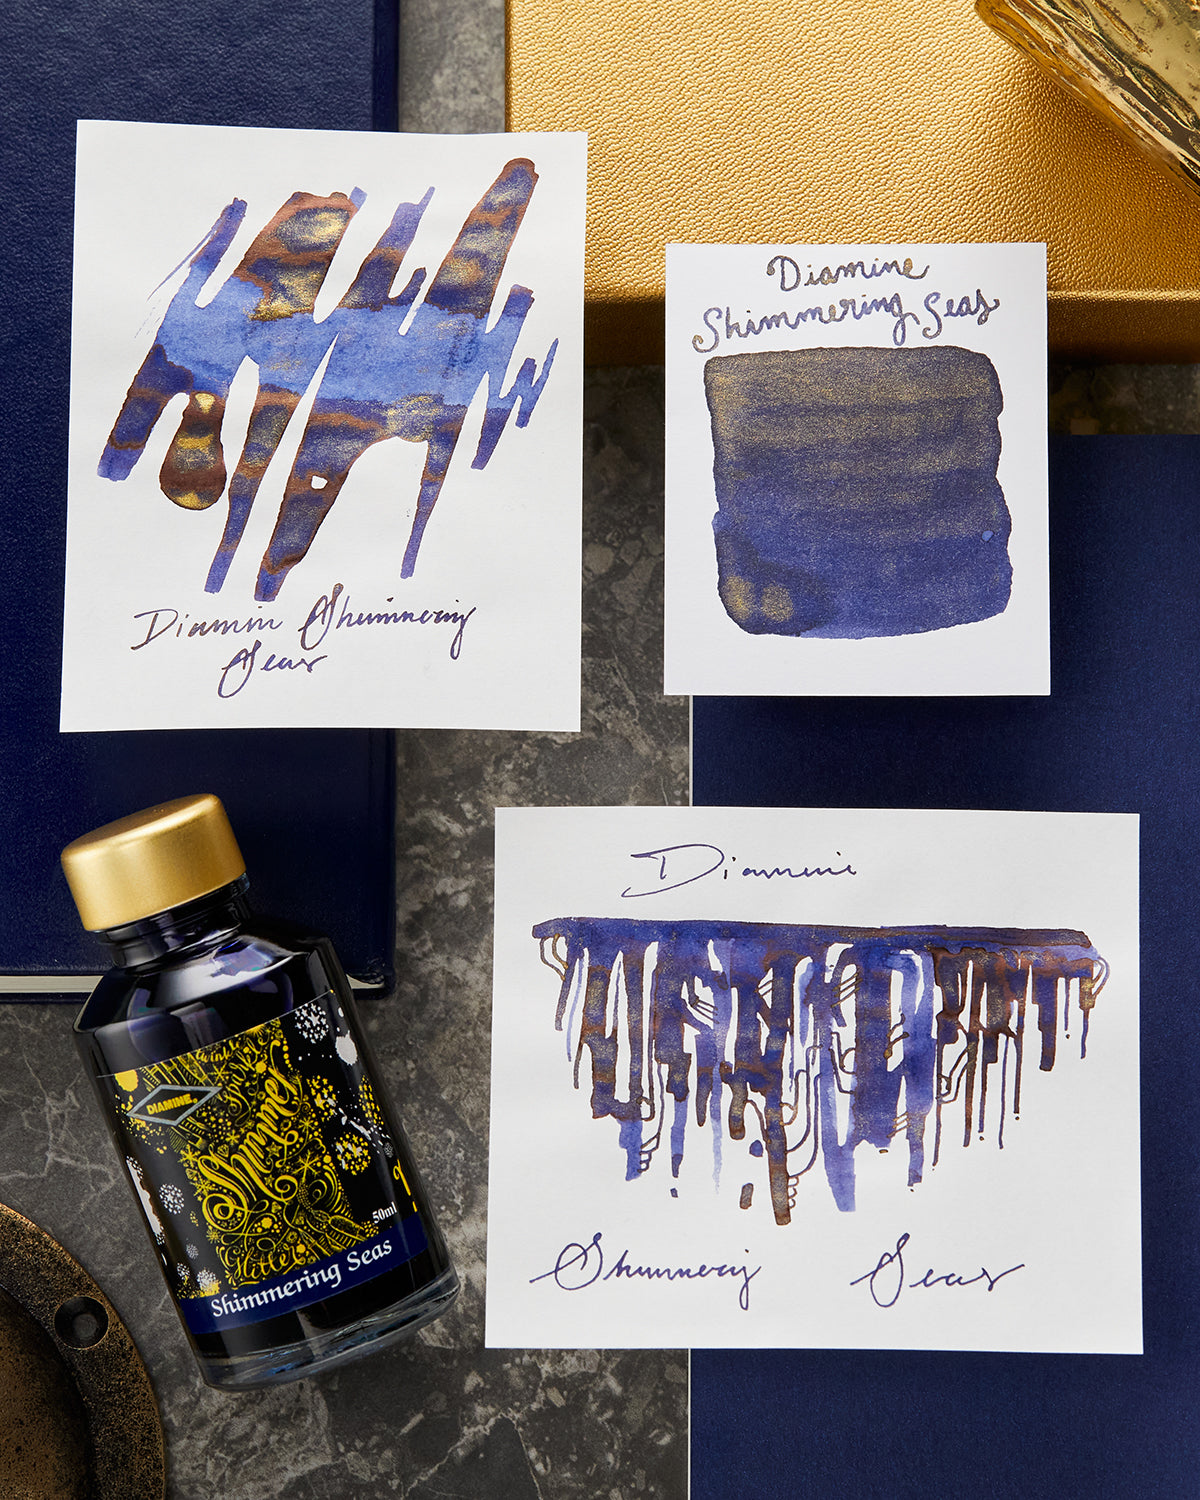 Diamine Shimmering Seas with examples of ink